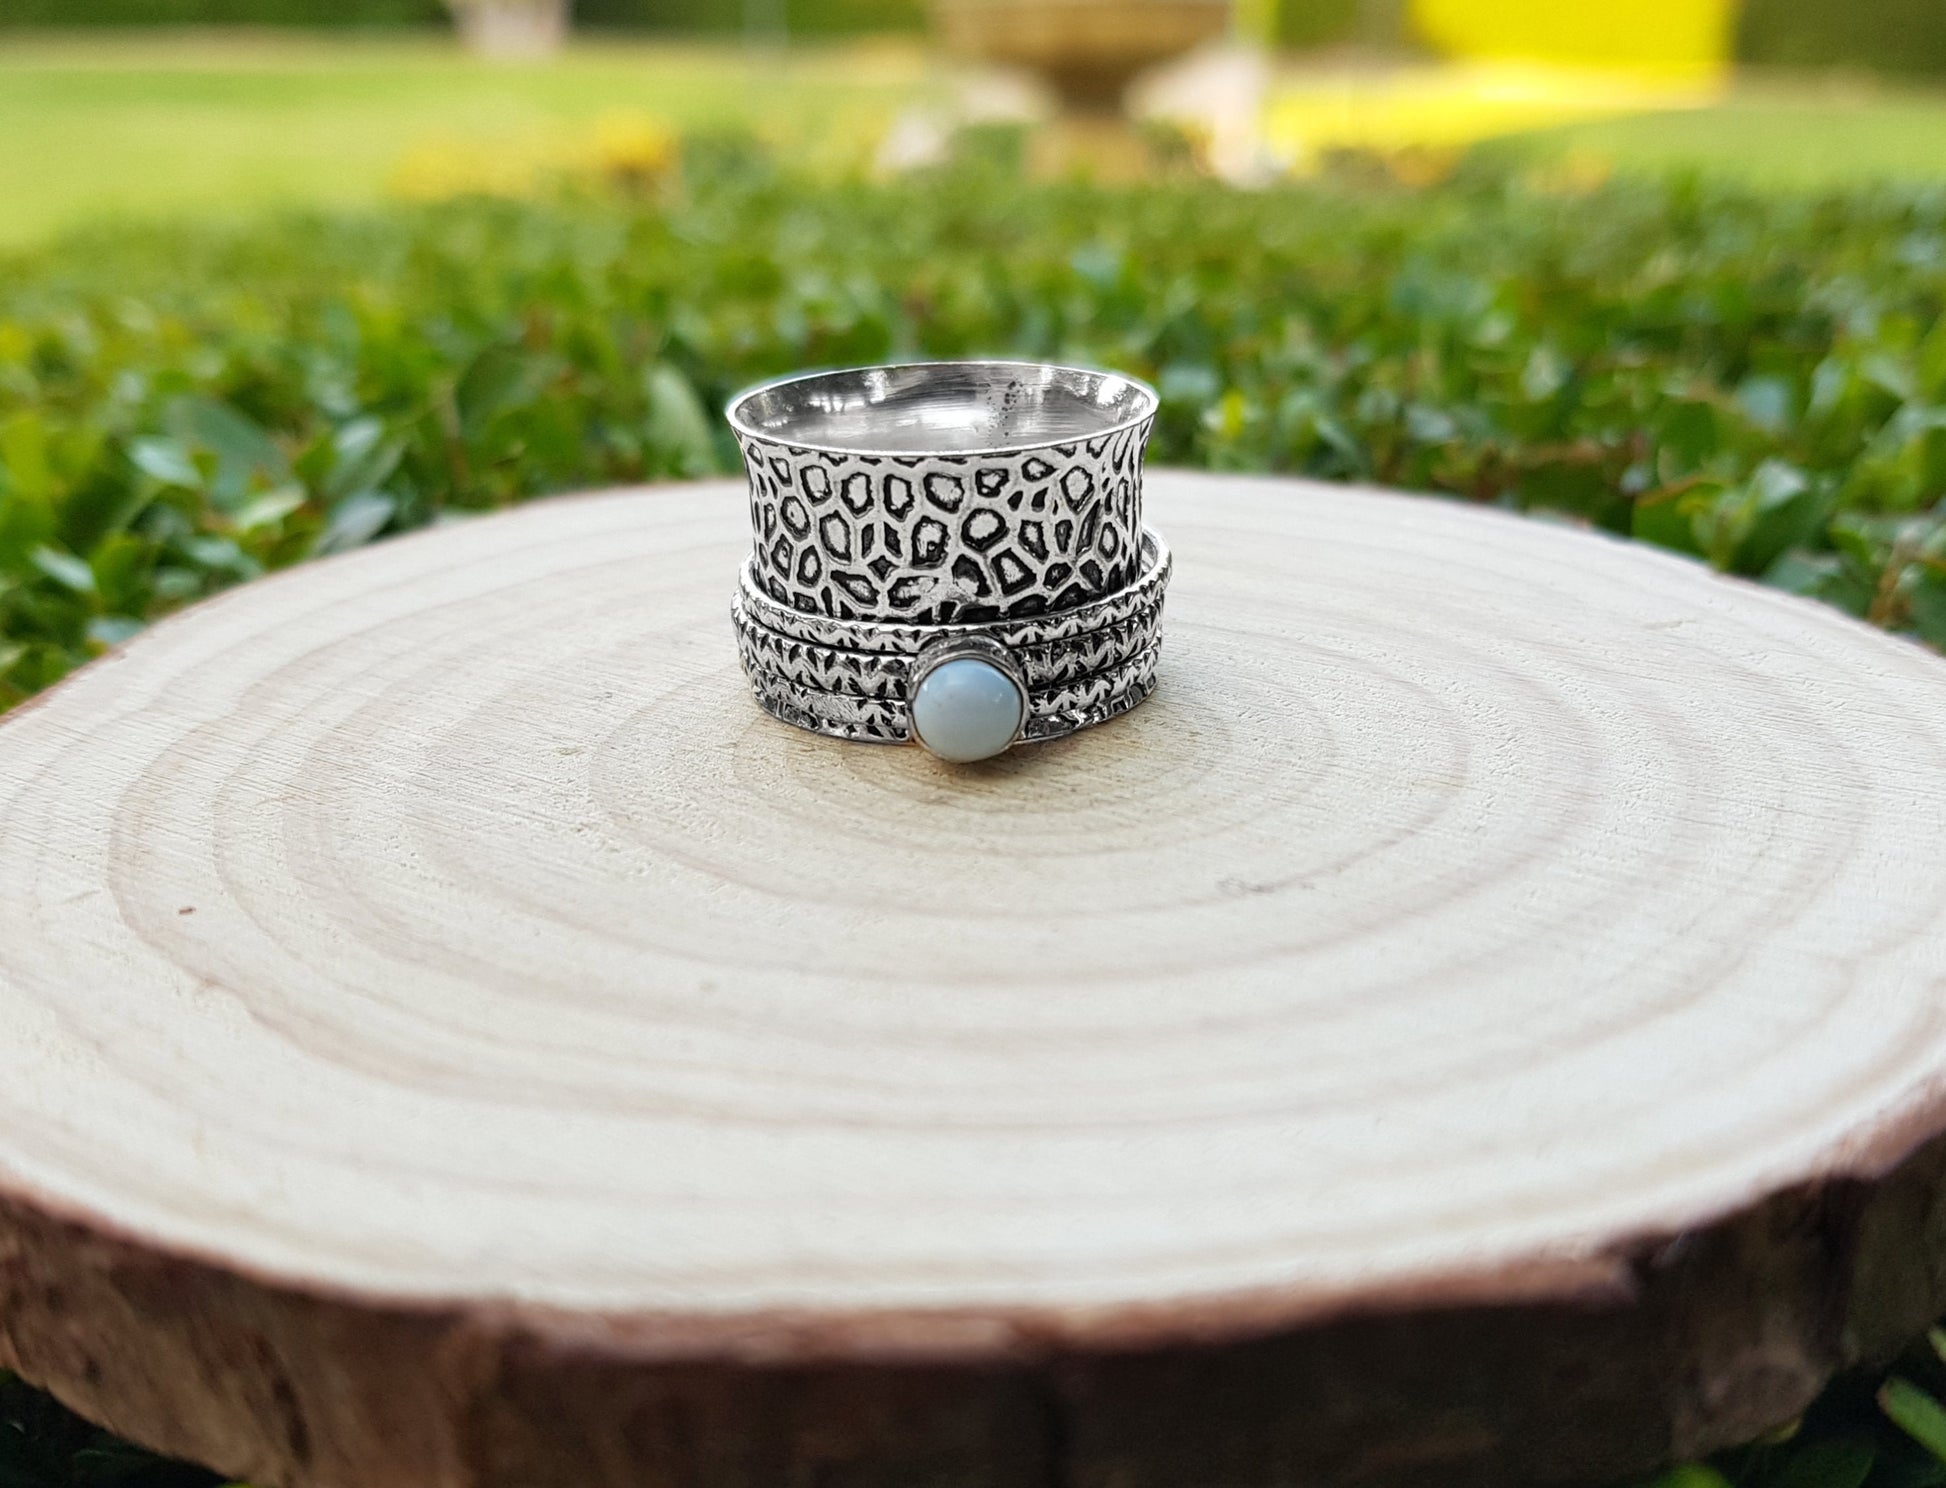 White Agate Spinner Ring In Sterling Silver Size US 6 1/4 Boho Ring Gypsy Jewellery Statement Ring Unique Gift